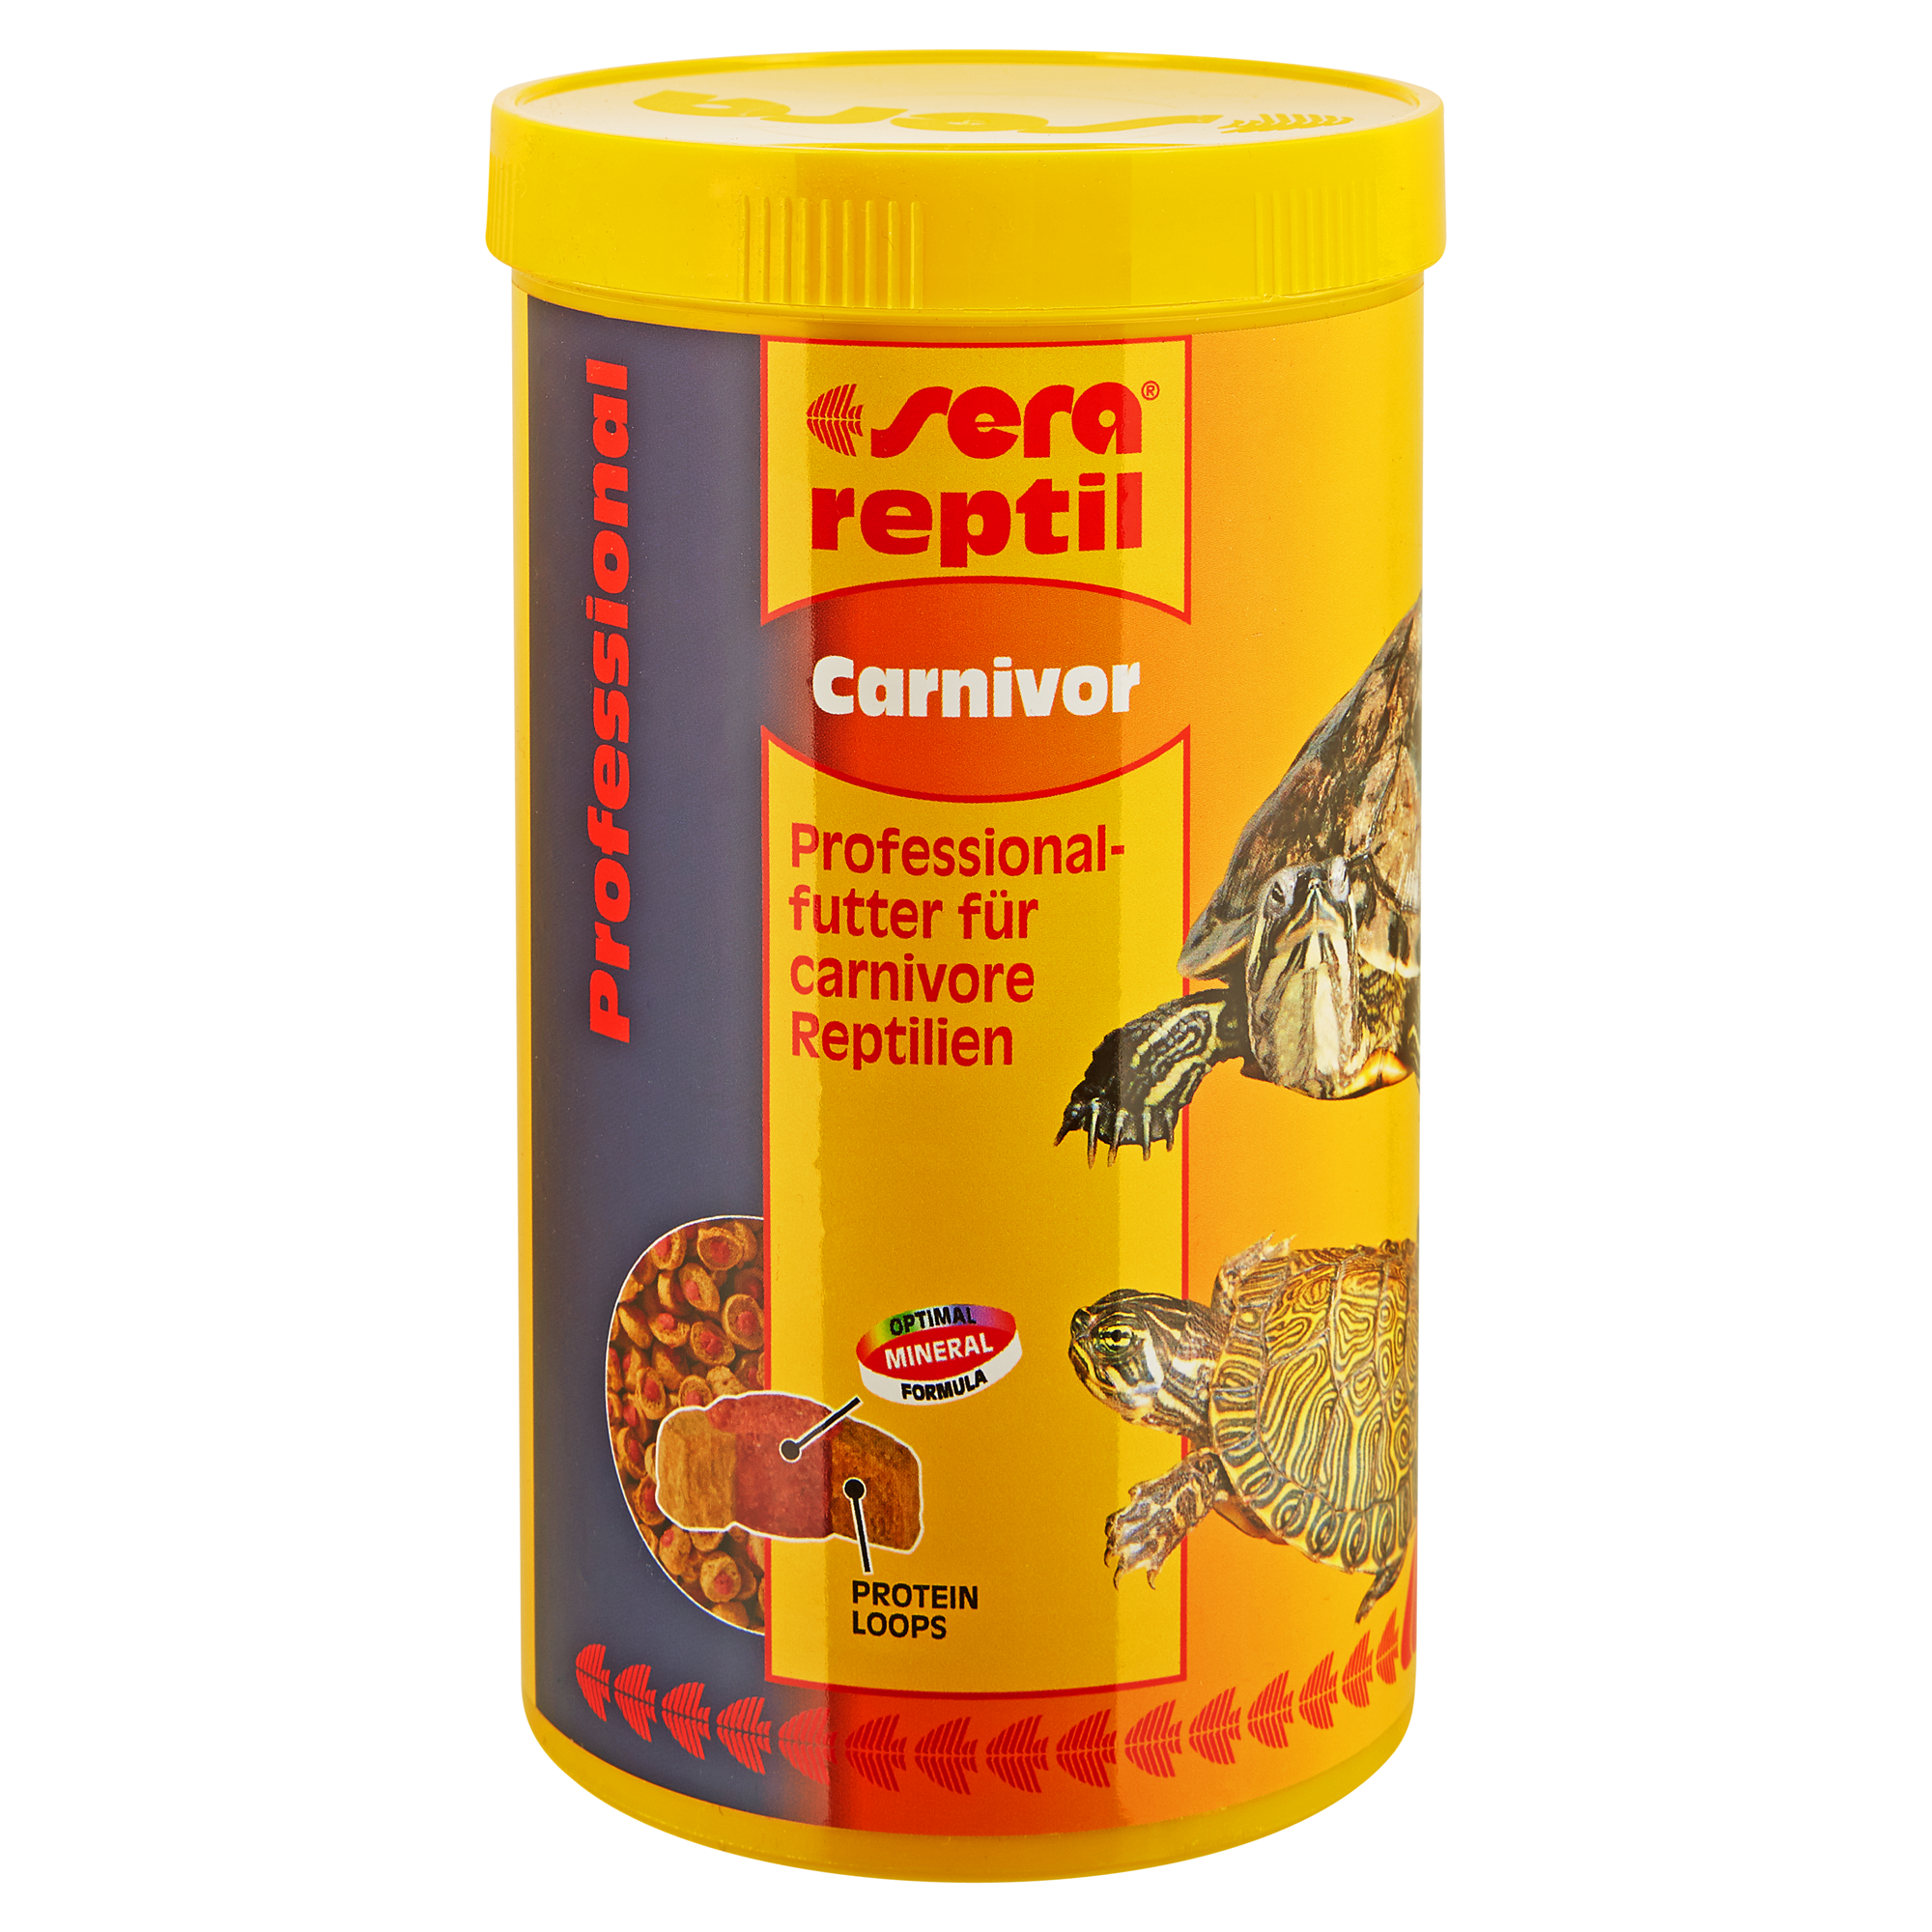 Professional-Futter "Reptil" Carnivor 1000 ml + product picture